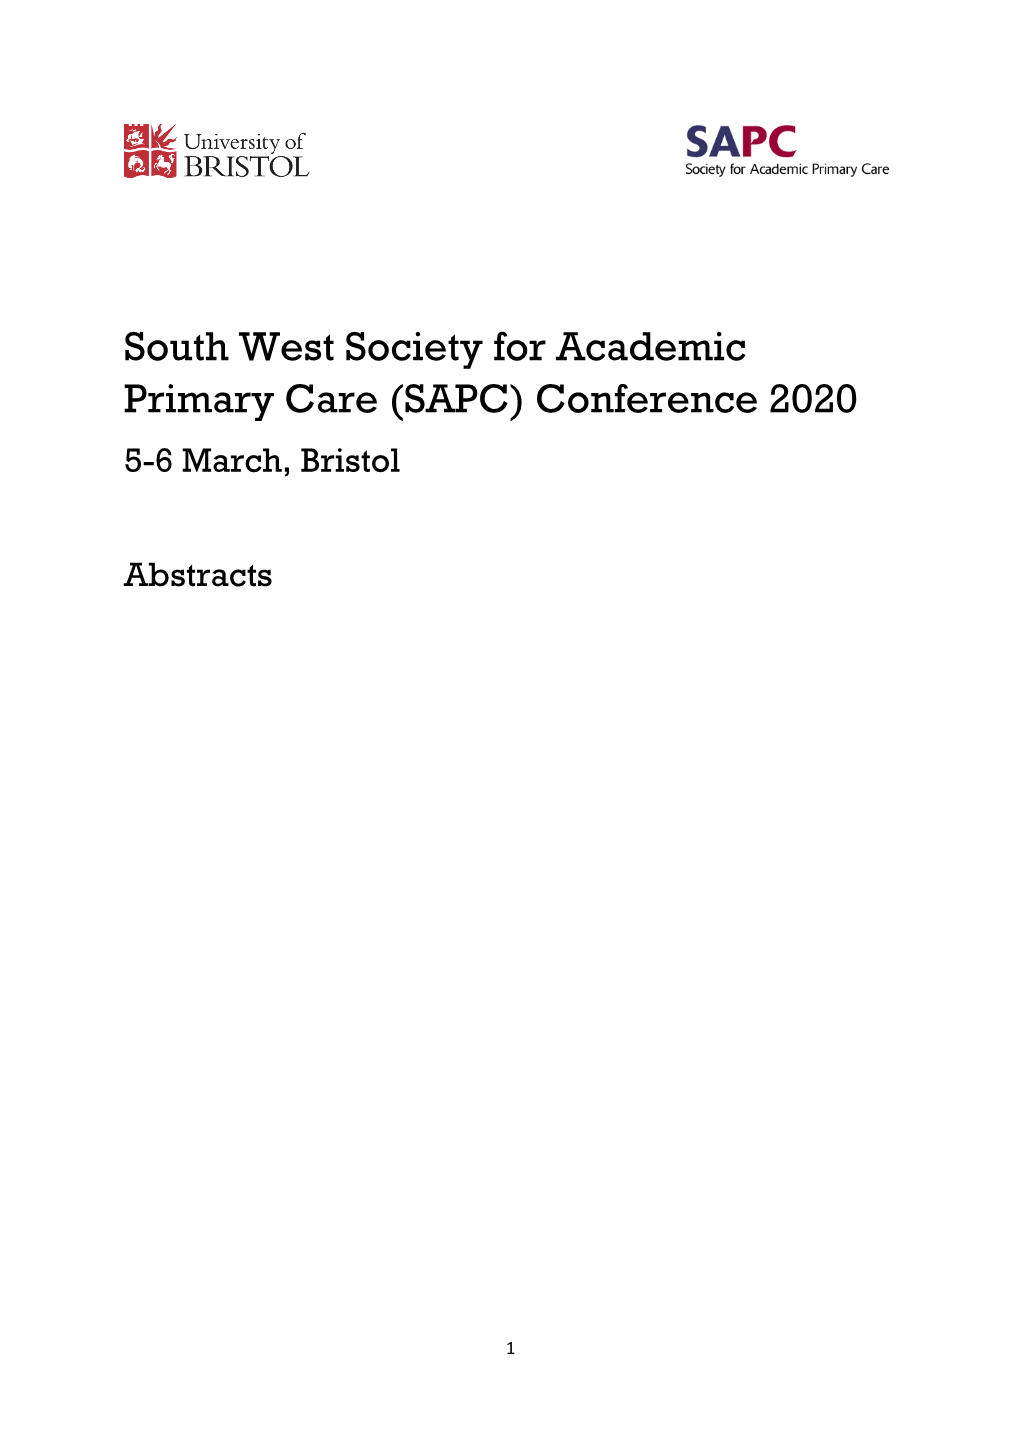 South West Society for Academic Primary Care (SAPC) Conference 2020 5-6 March, Bristol